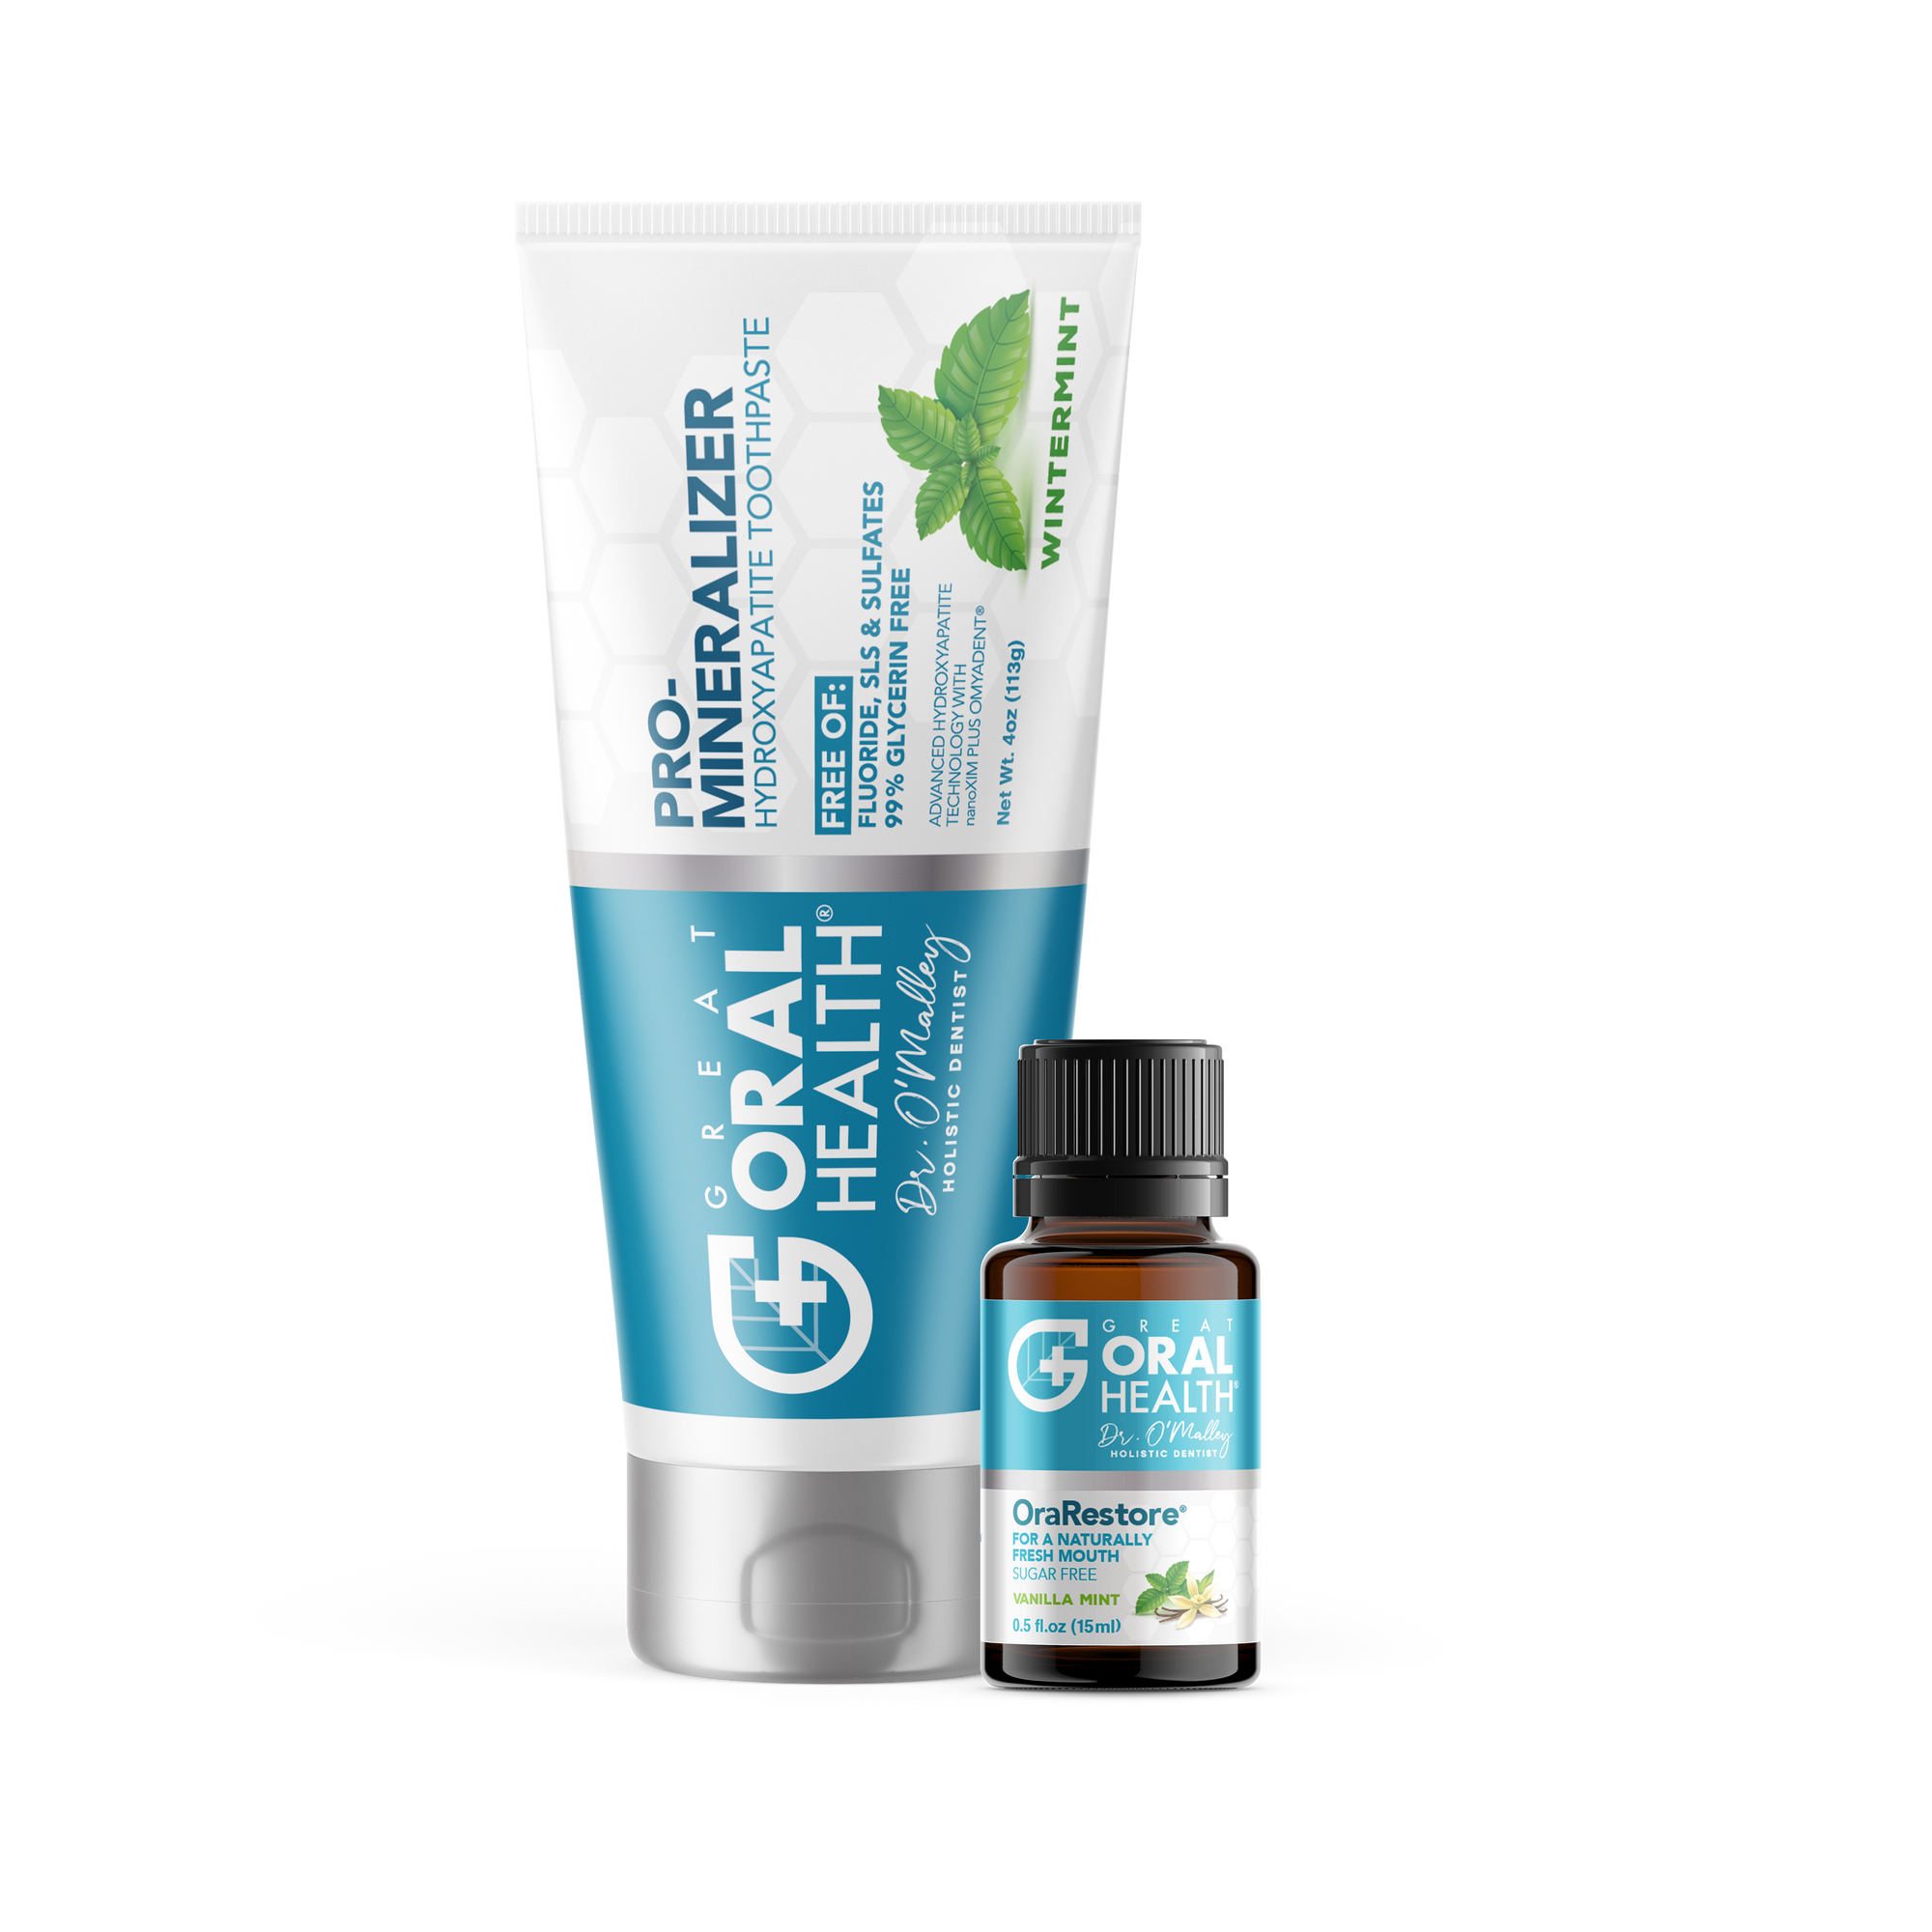 The Oral Care Boost Pack: Our Toothpaste and Essential Oil Blend